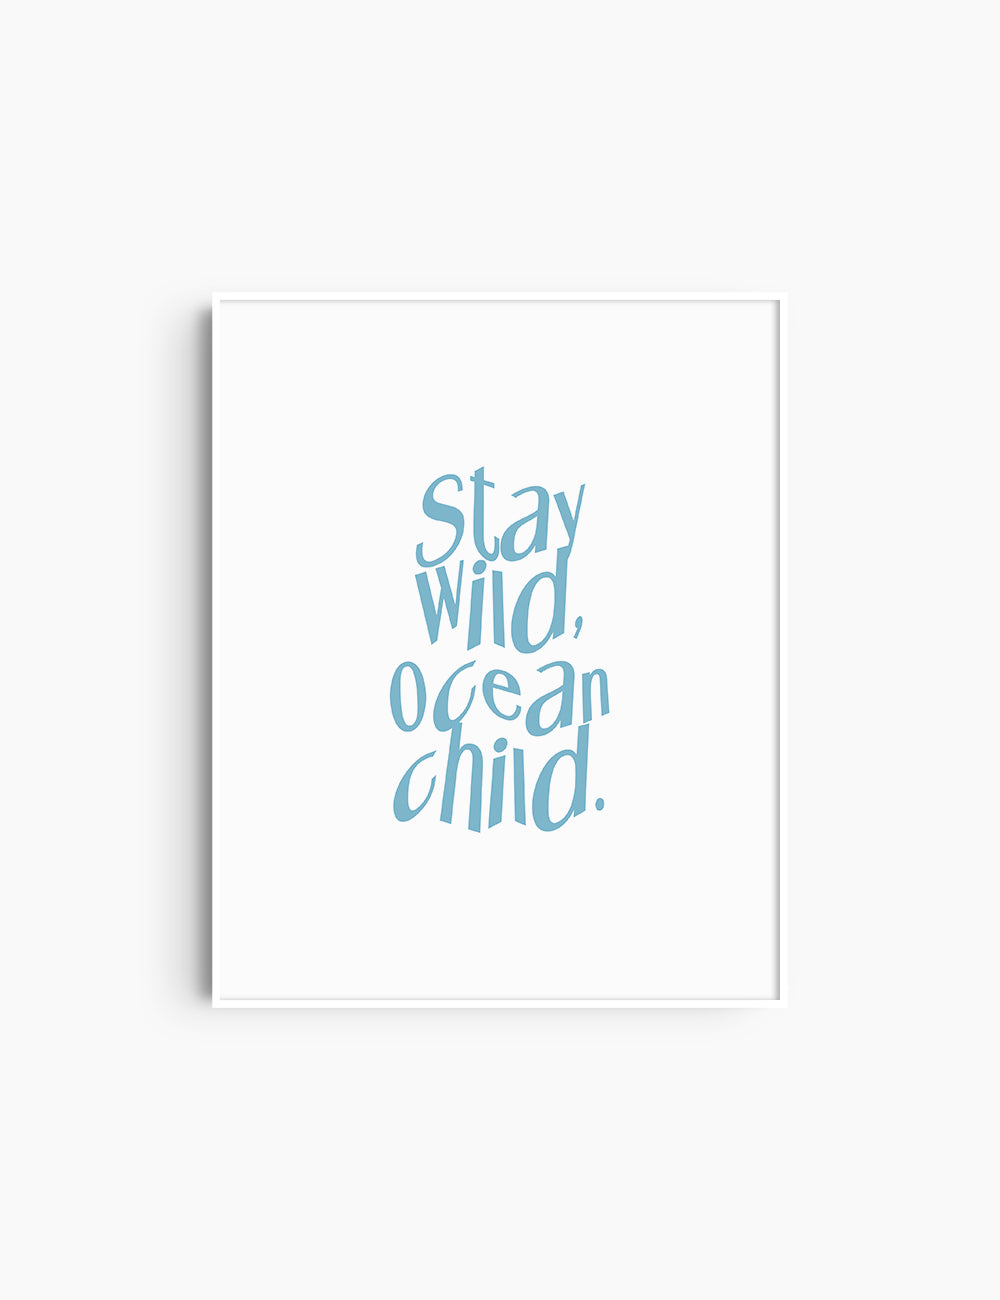 STAY WILD, OCEAN CHILD. Light Blue and White. Printable Wall Art Quote. 